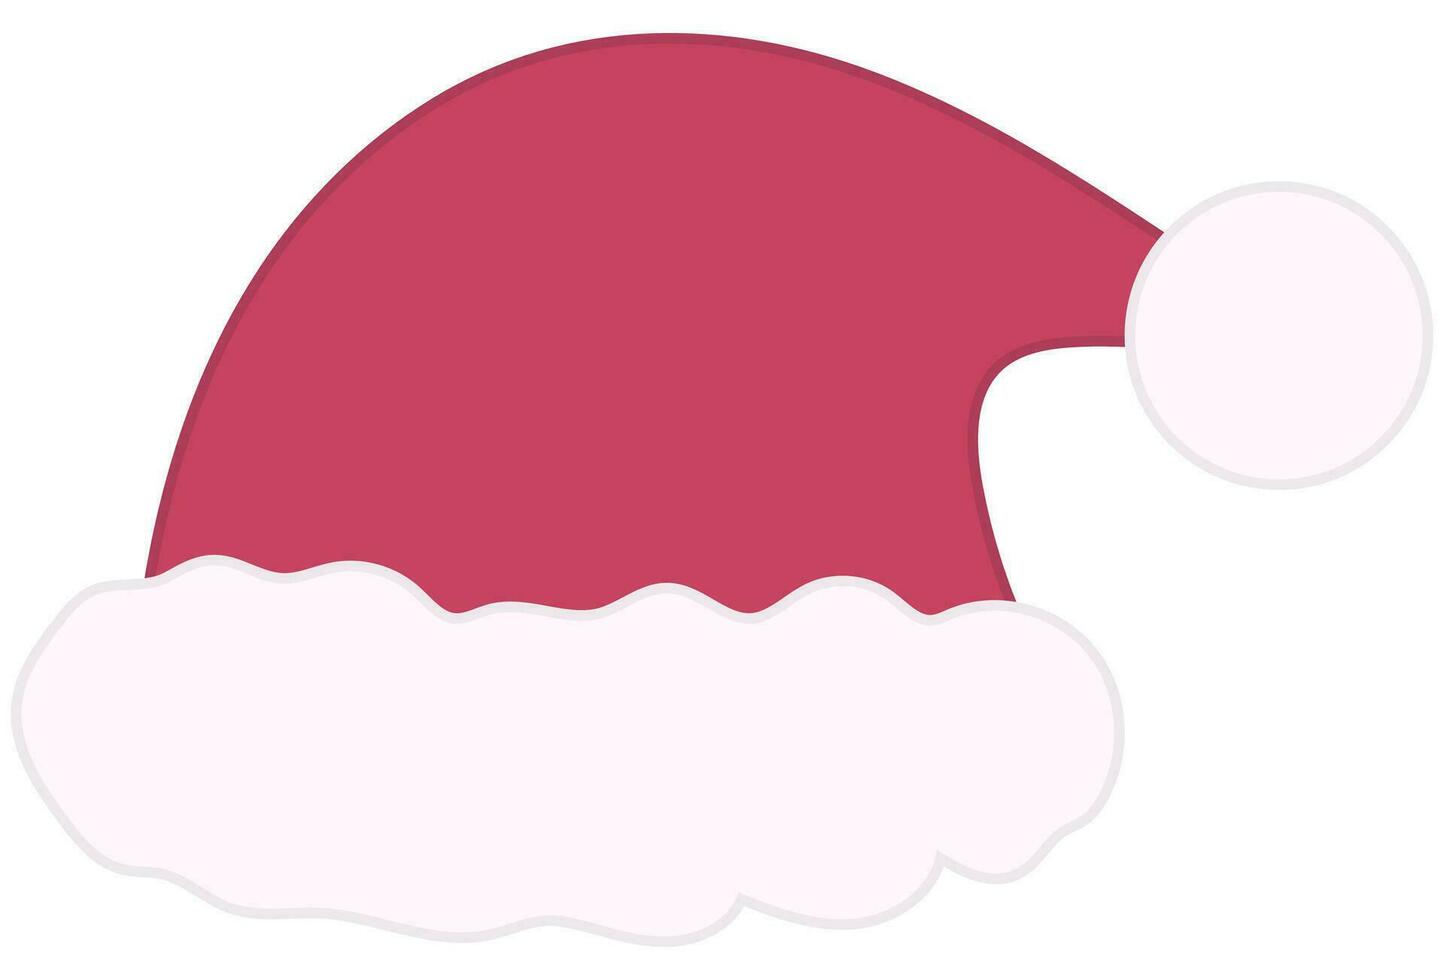 Christmas red hat icon. Santa claus costume vector illustration.